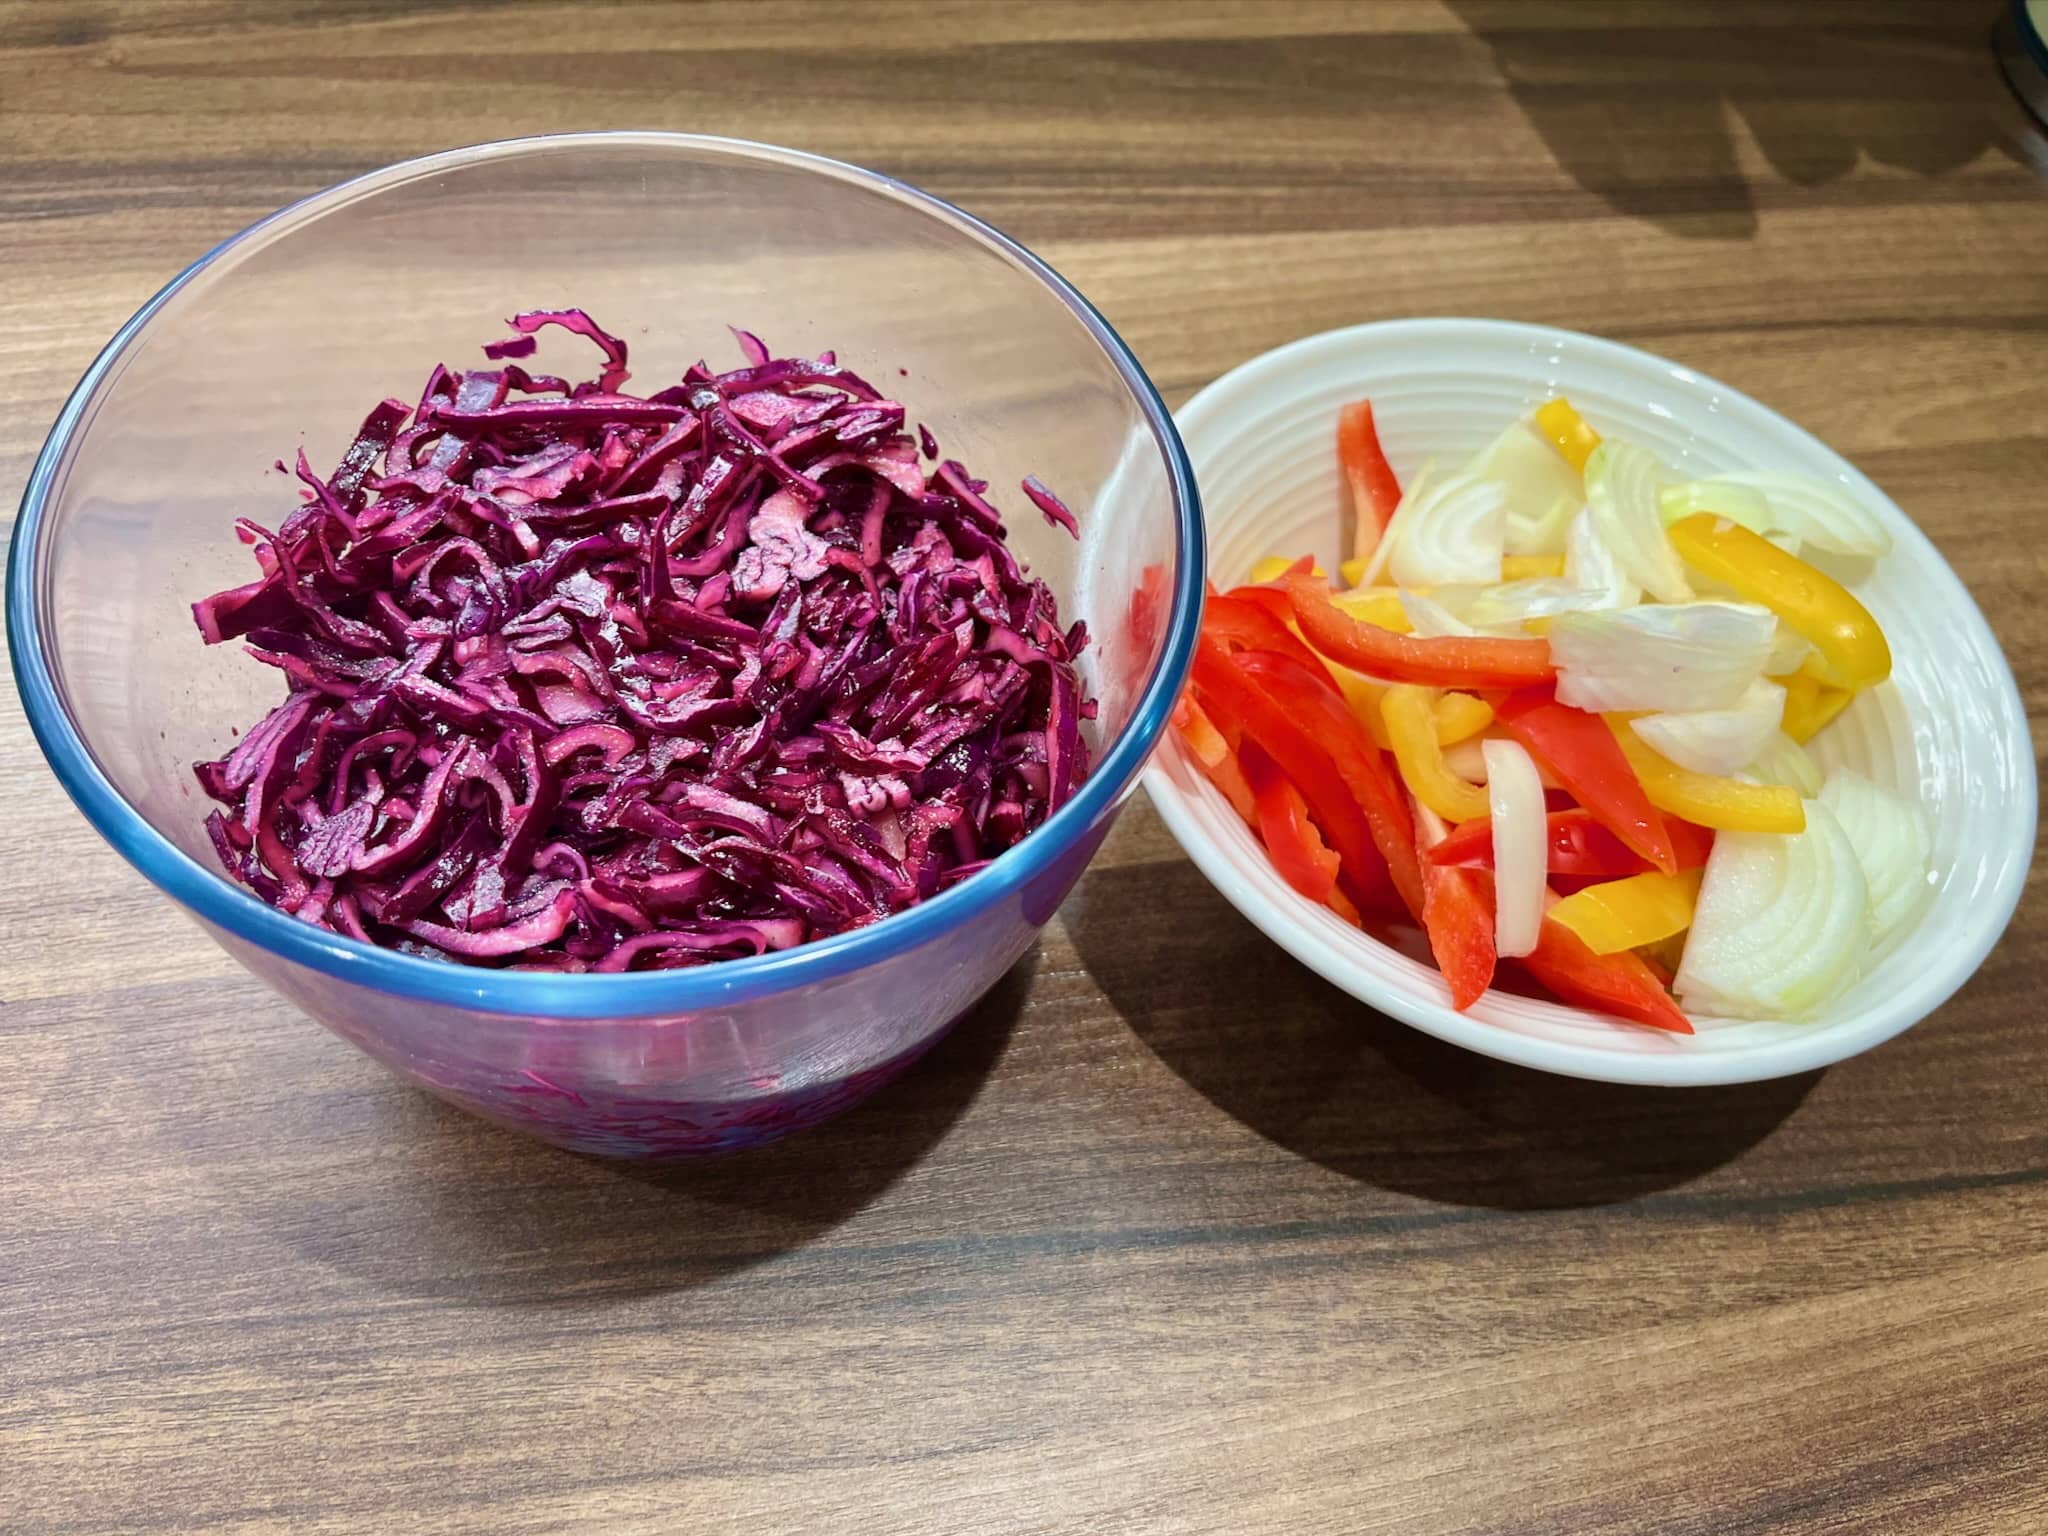 Red cabbage well mixed with vegetables in a bowl on the side